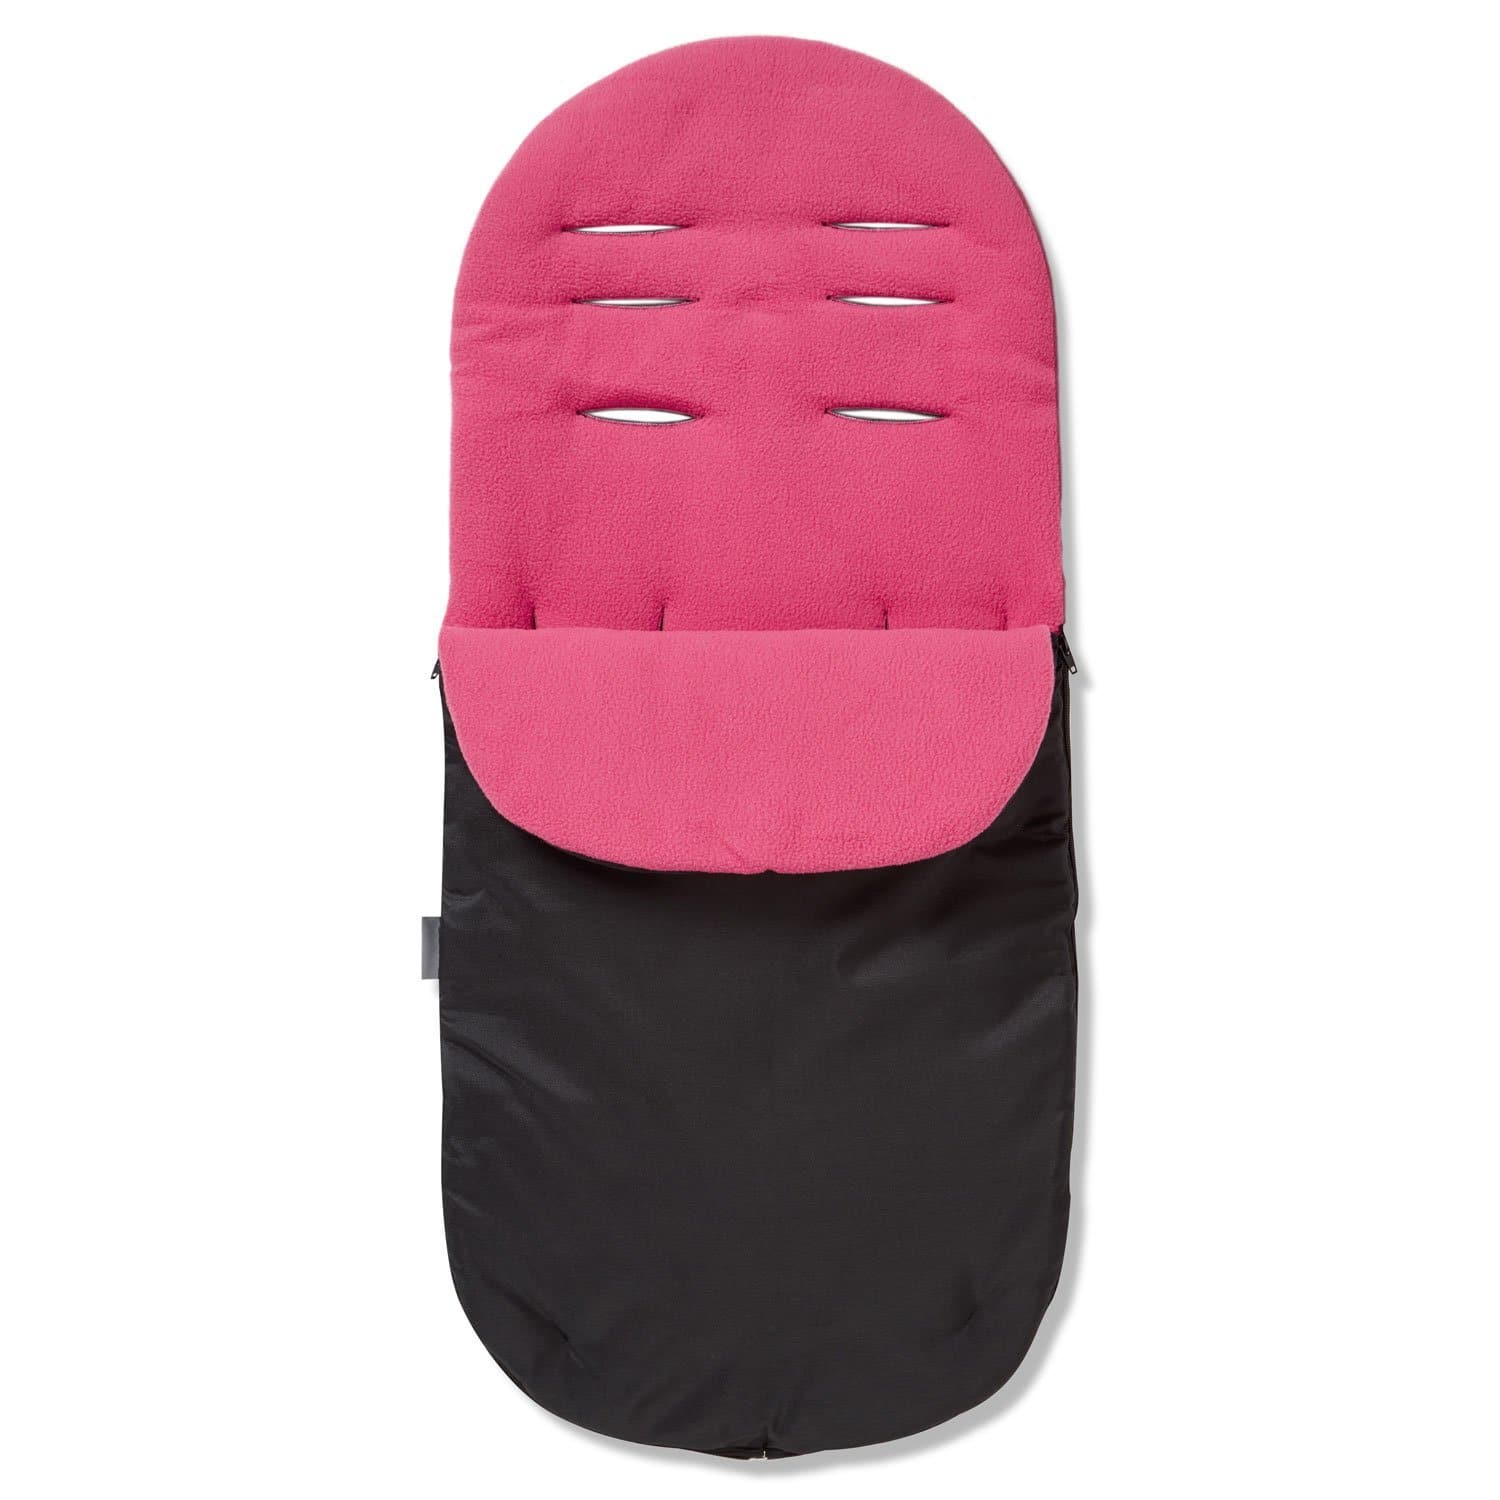 Footmuff / Cosy Toes Compatible with Nania - Dark Pink / Fits All Models | For Your Little One